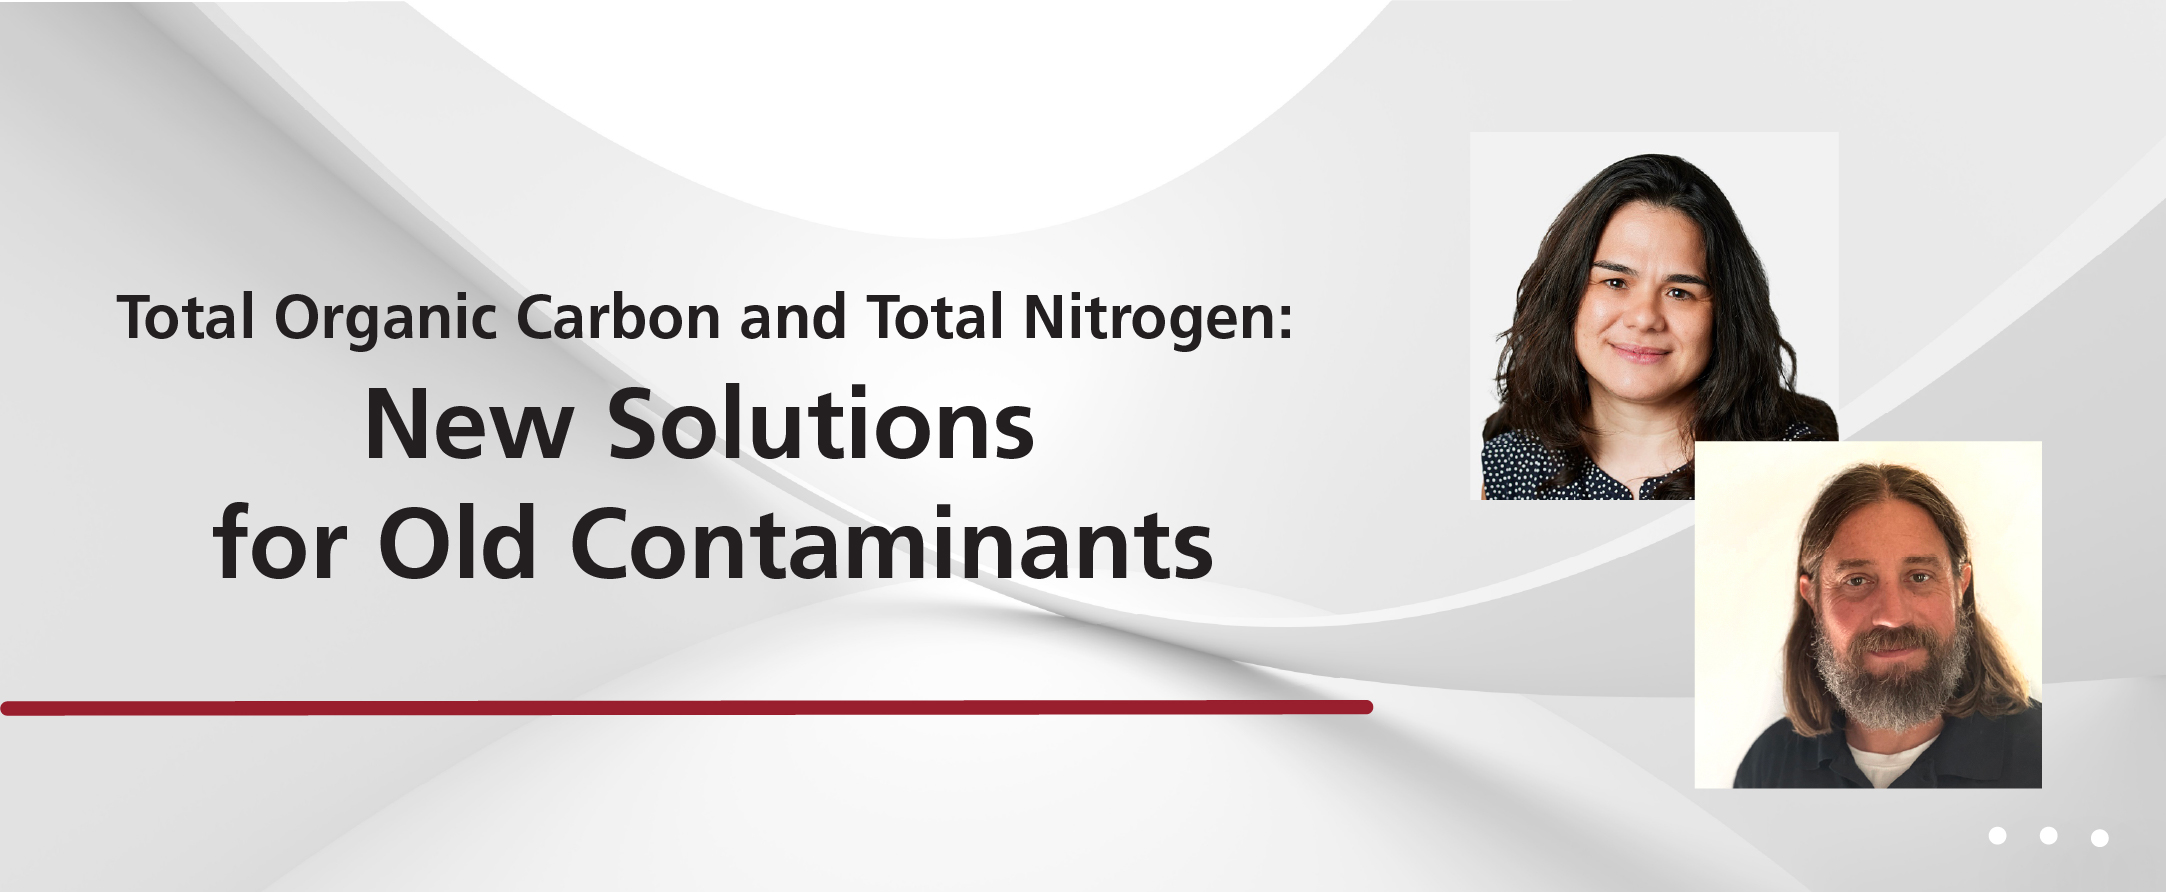 New Solutions for Old Contaminants